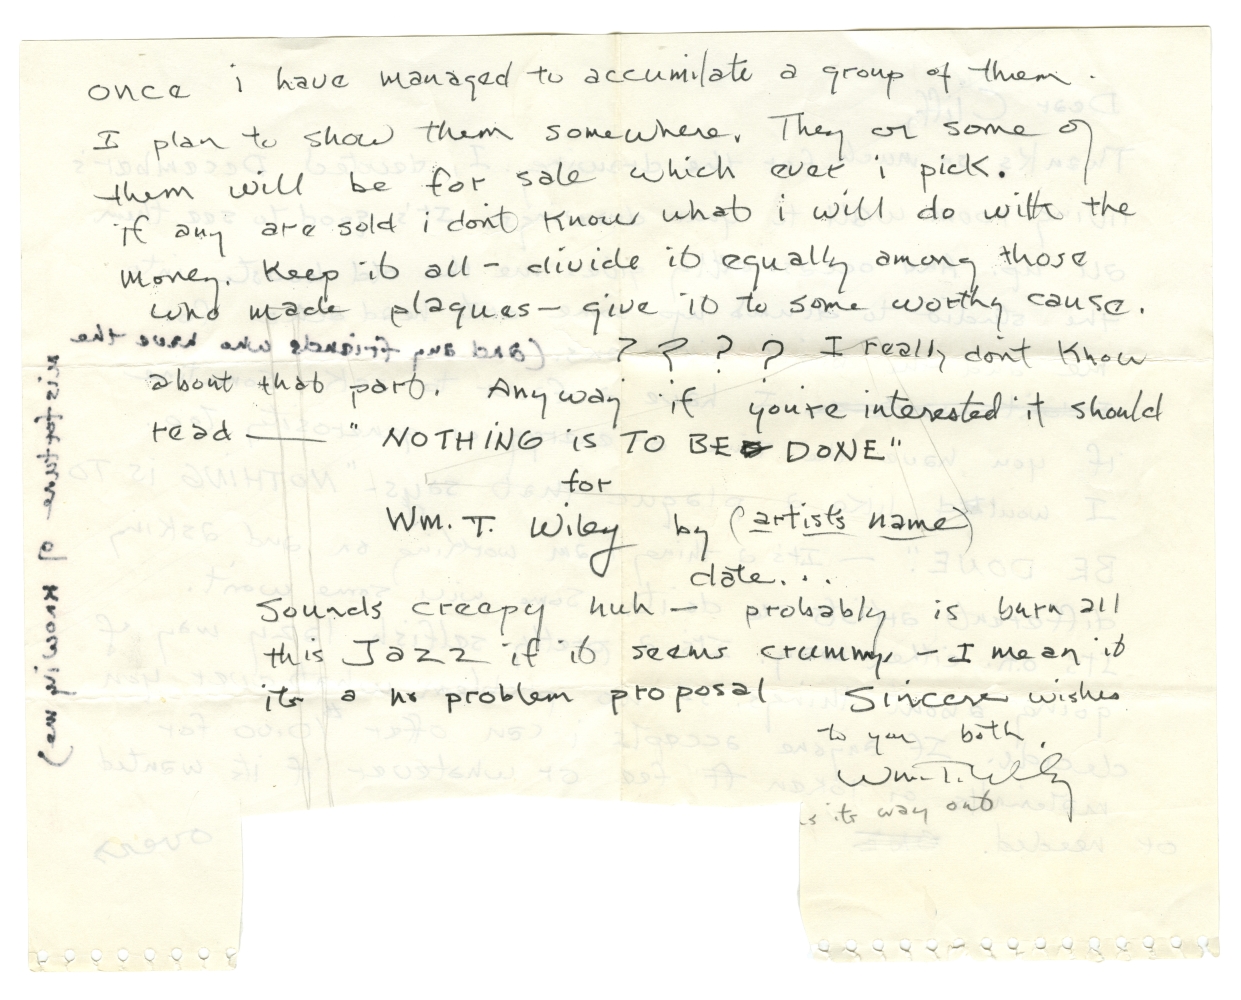 Letter from William T. Wiley to H. C. Westermann, c. December 1966